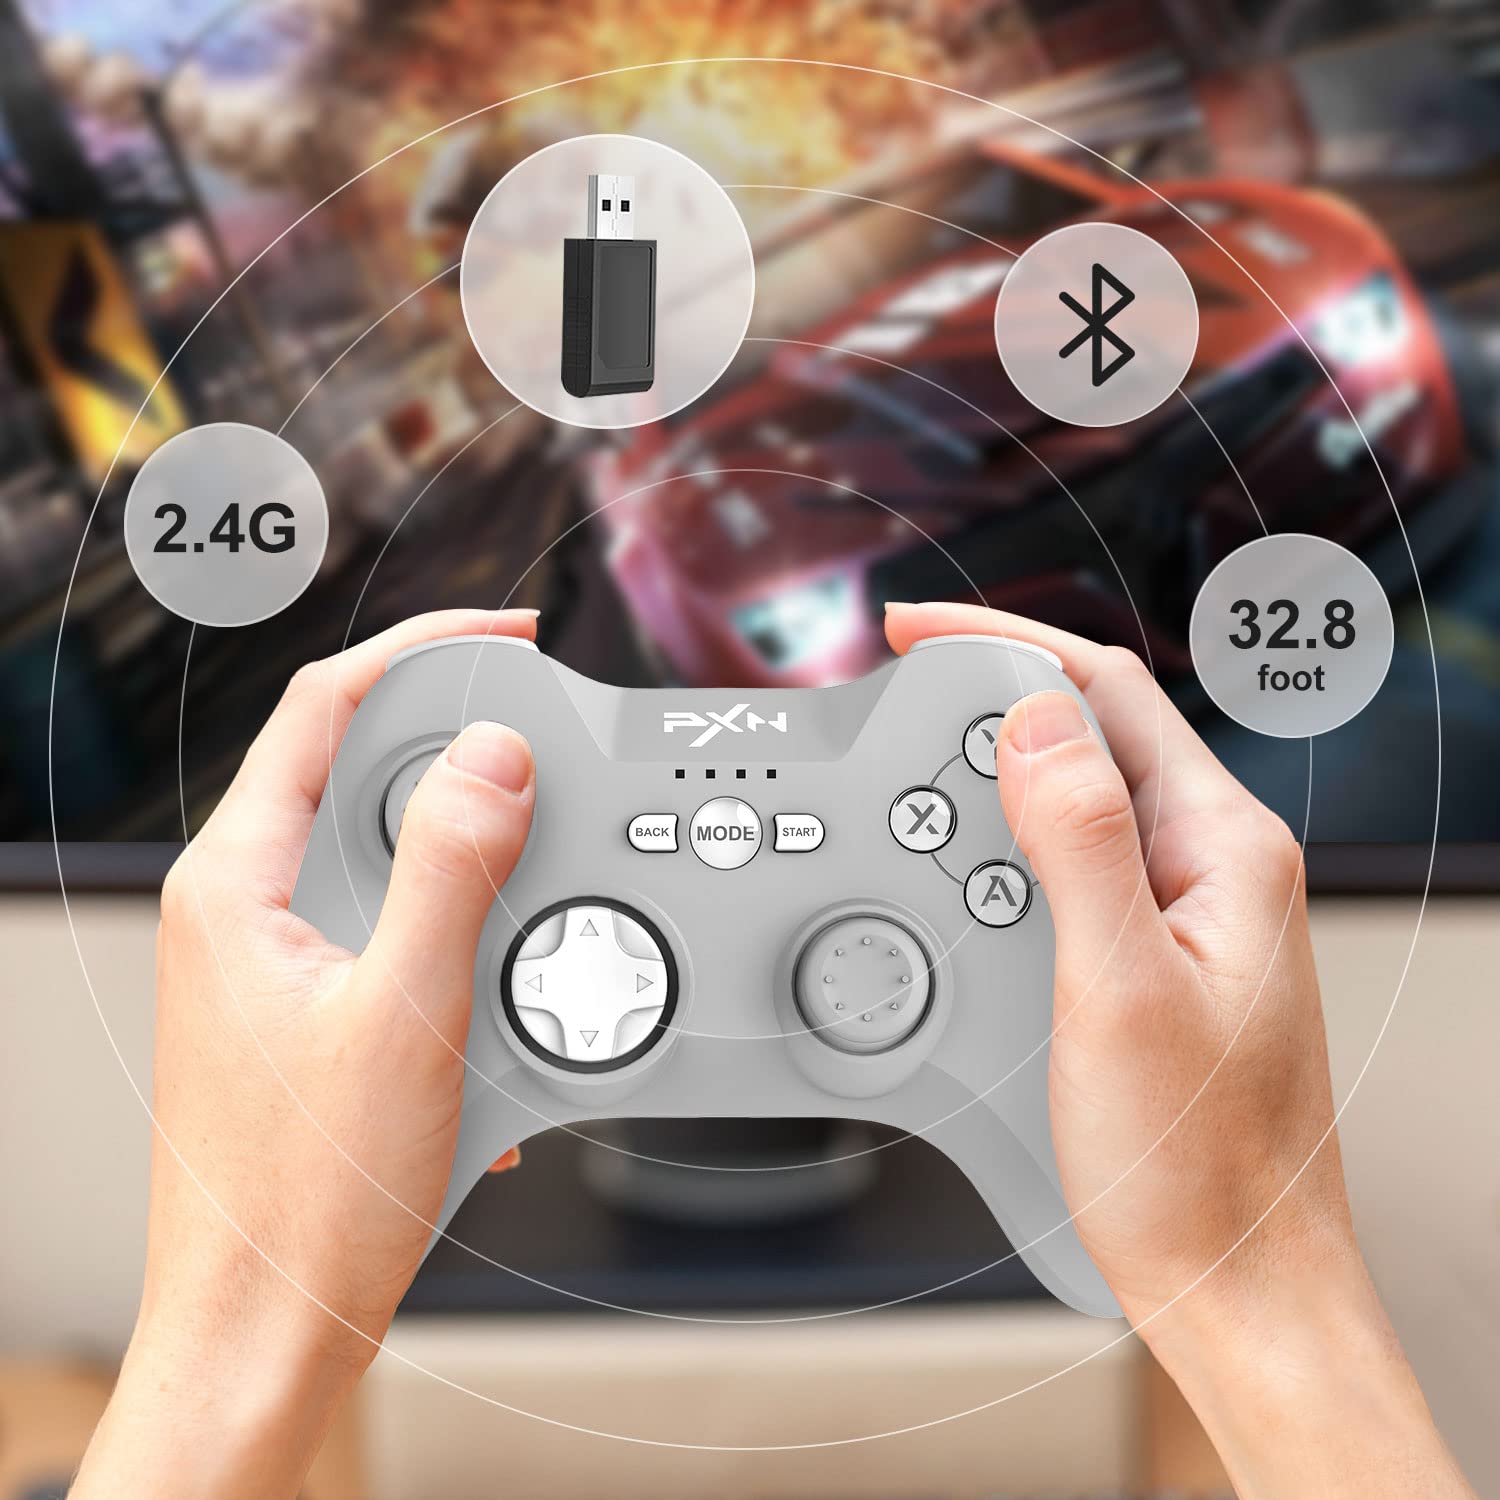 PXN 2.4G Wireless Game Controller, P3 PC Wireless Controller, Plug and Play Game Controller Dual Vibrators for PC(Windows 7/ 8/ 10/ 11), PS3, iOS 14.2+, Android 4.0+ (Gray)